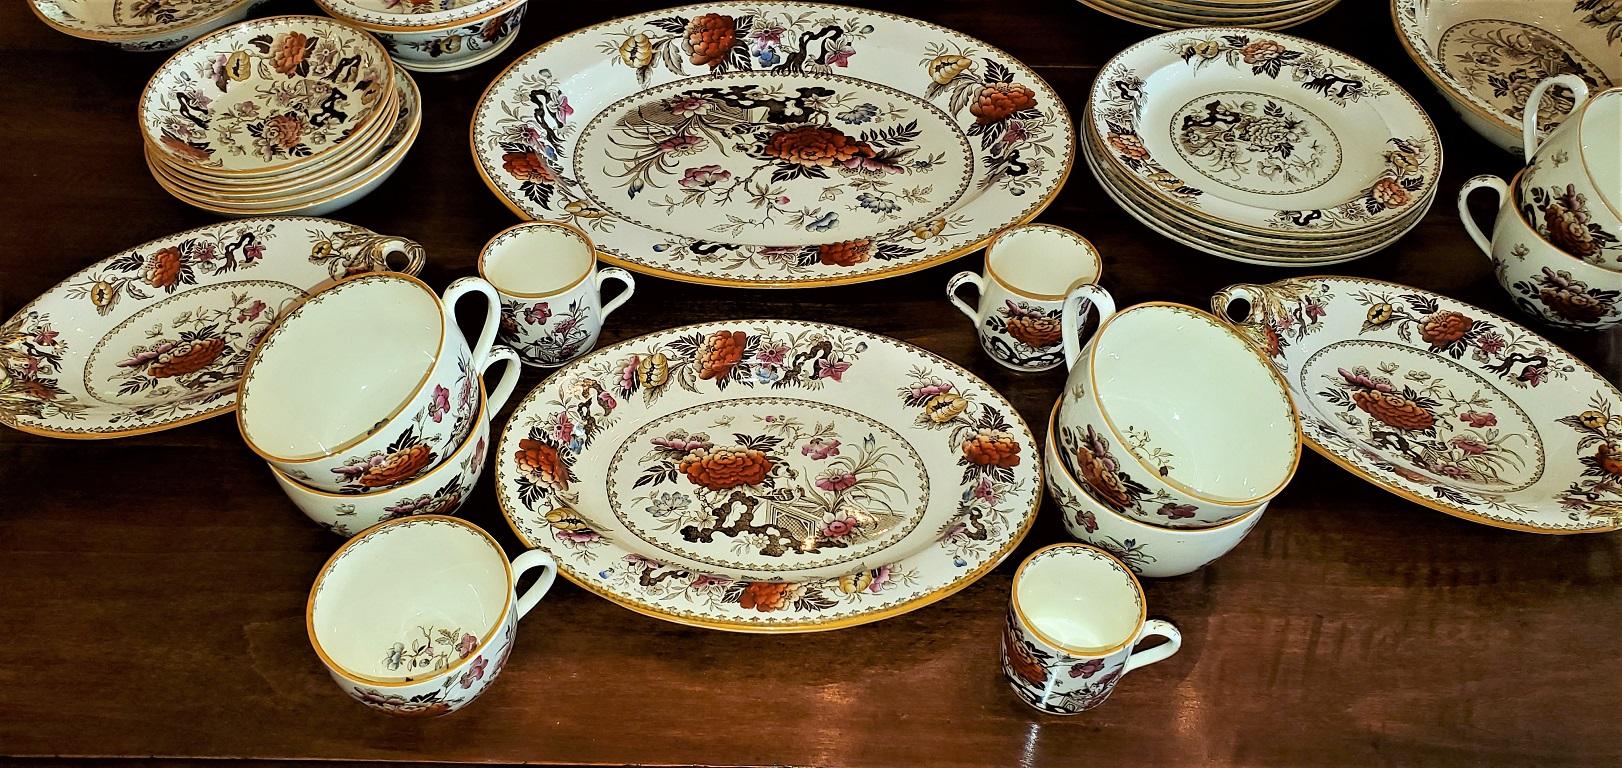 Hand-Painted 19th Century Wedgwood Bullfinch A1260 67-Piece Service